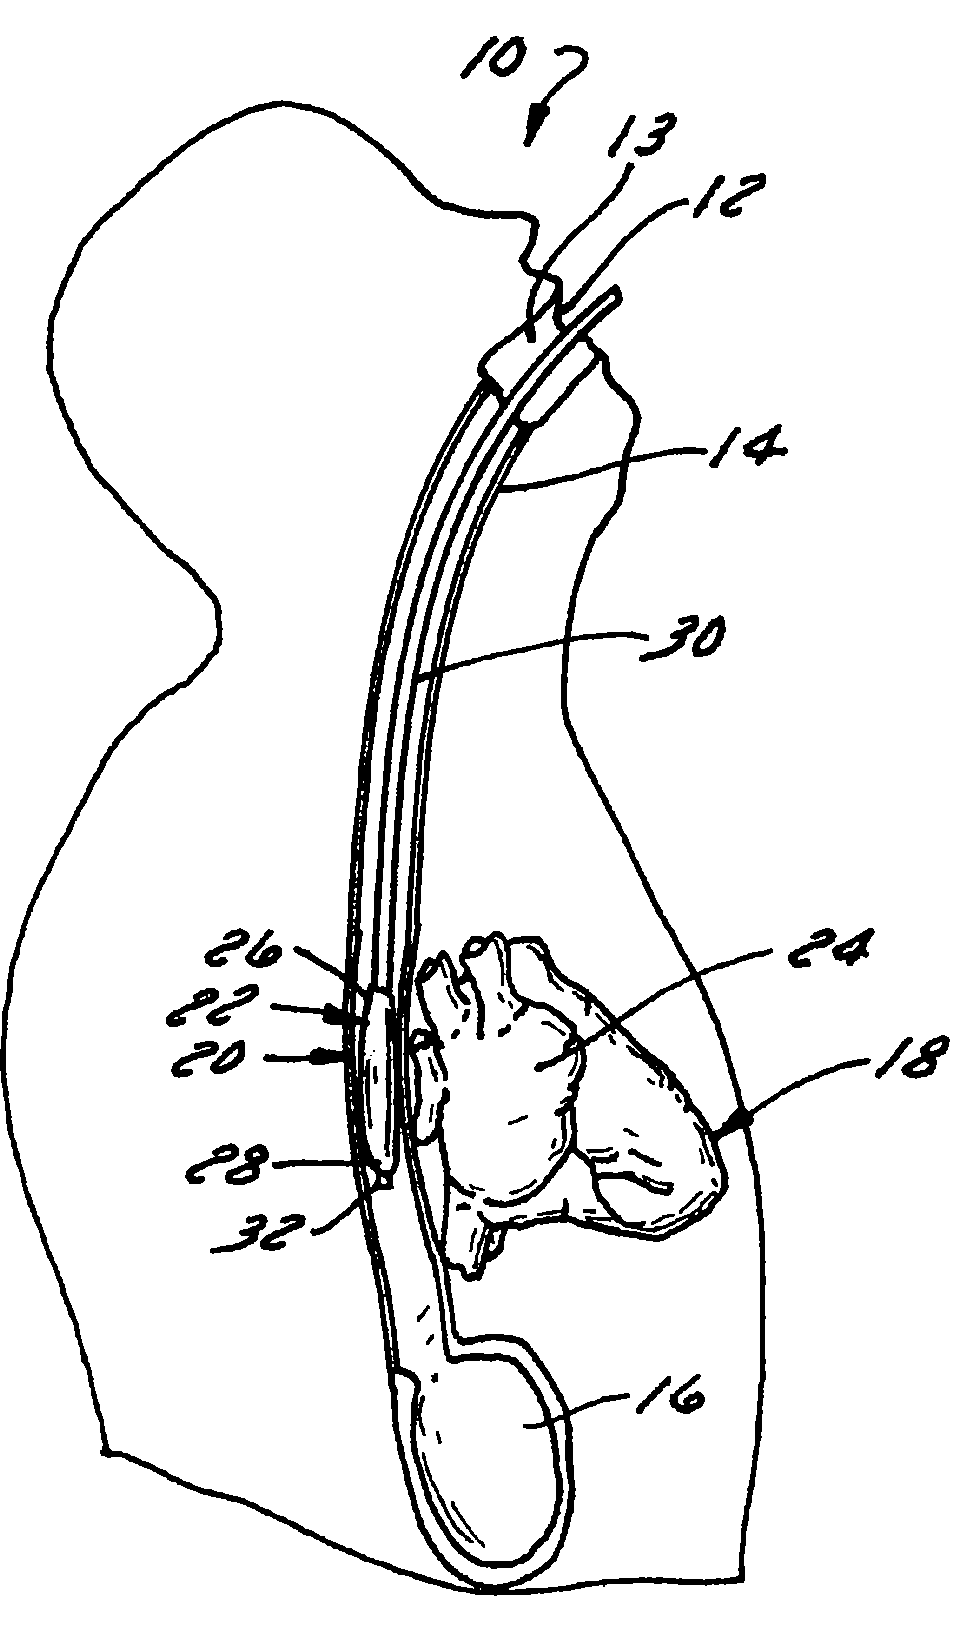 Intra-esophageal balloon system